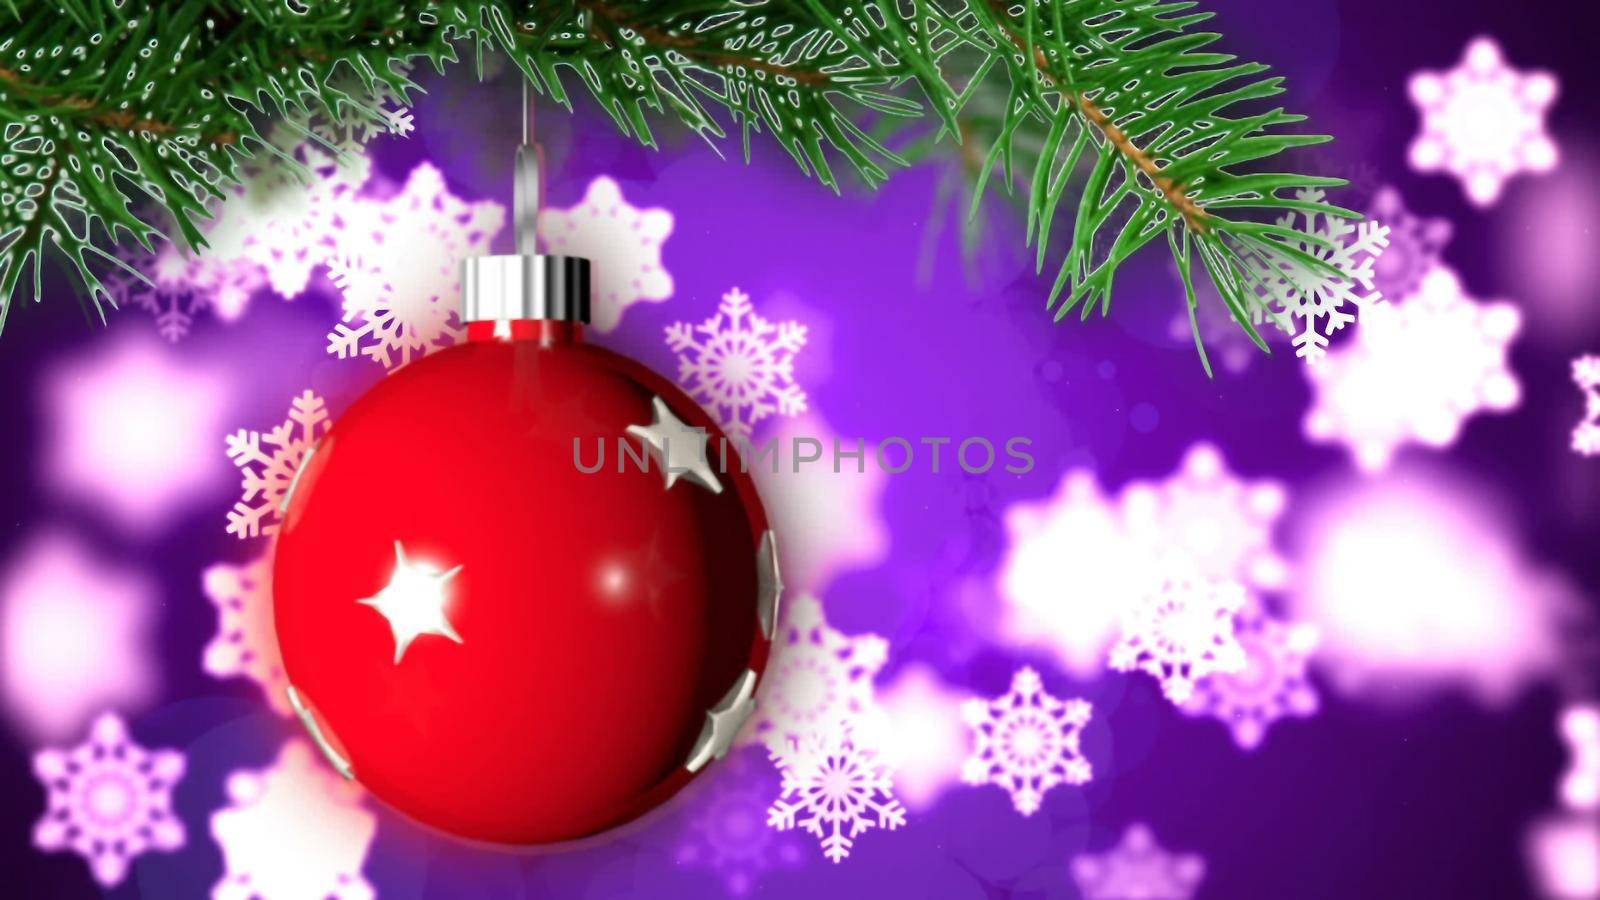 Christmas background with nice ball 3D rendering by designprojects